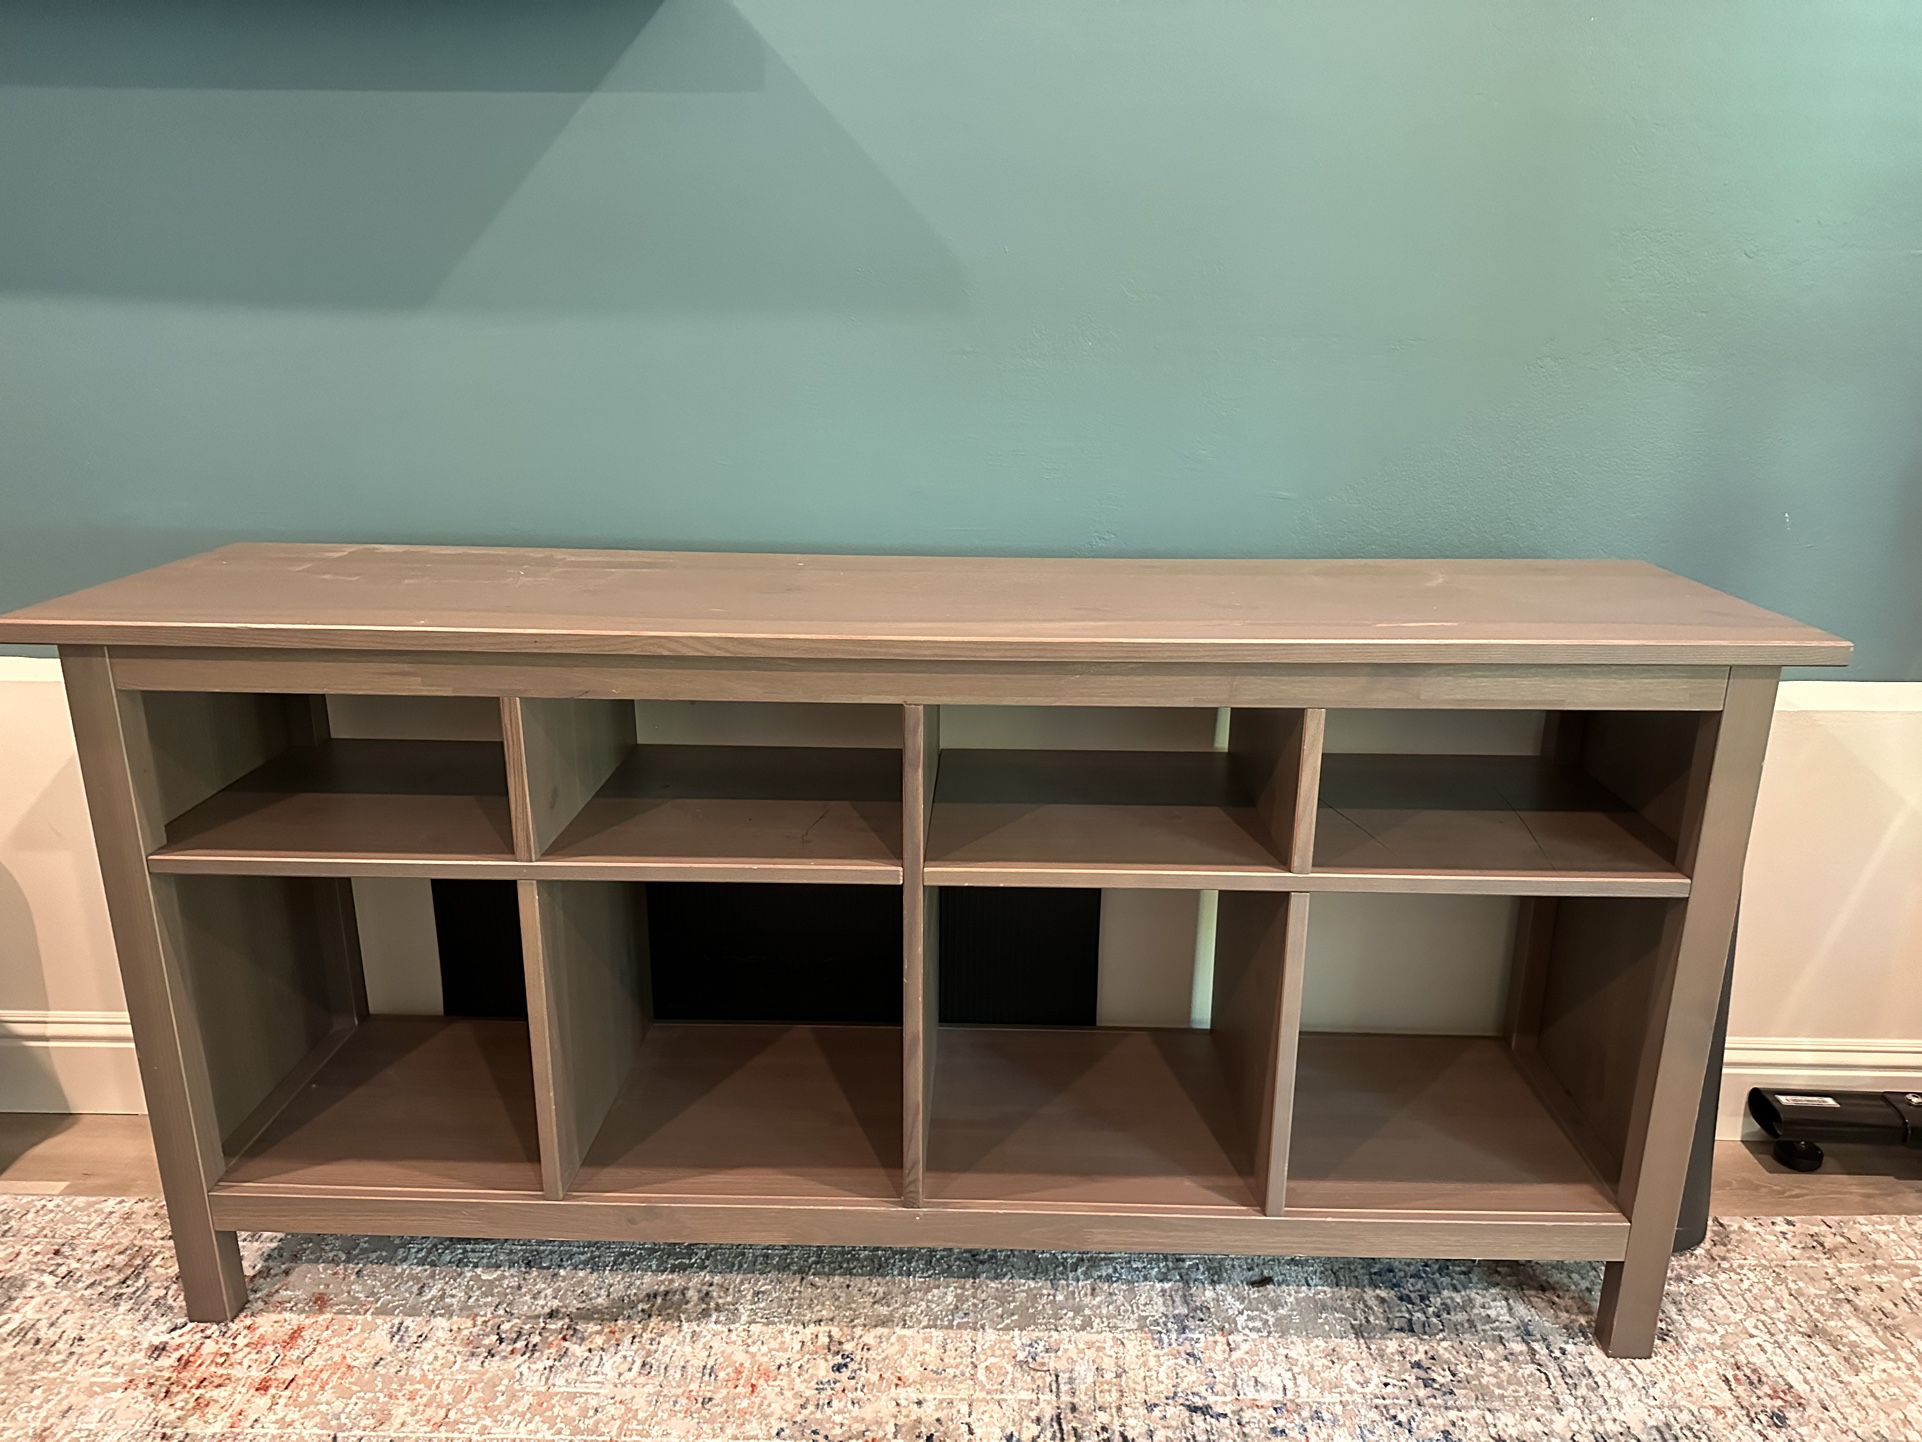 Nice Solid Wood End Tables And Shelving Unit